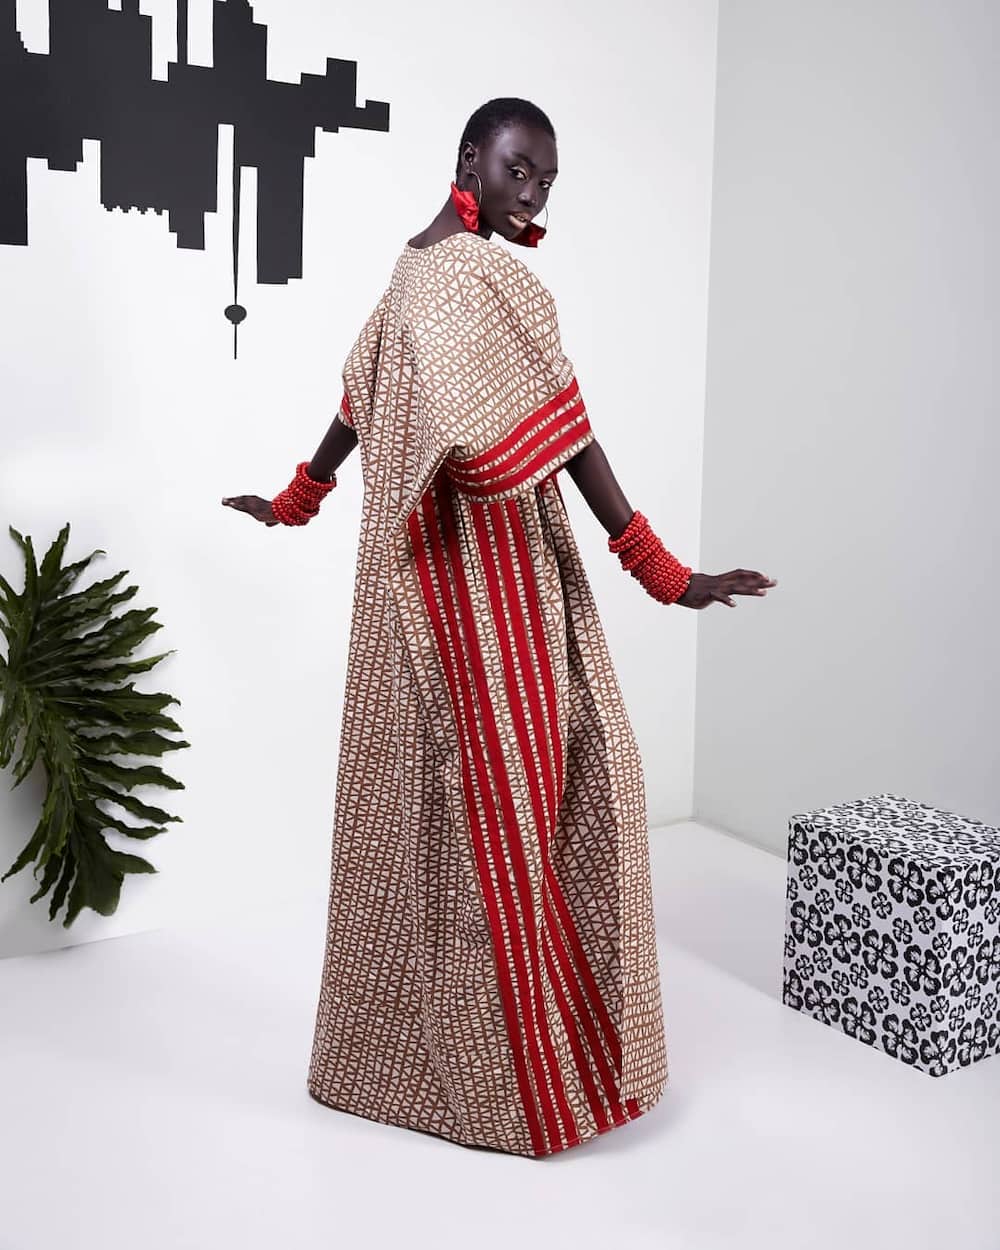 15 South African designers you should be following